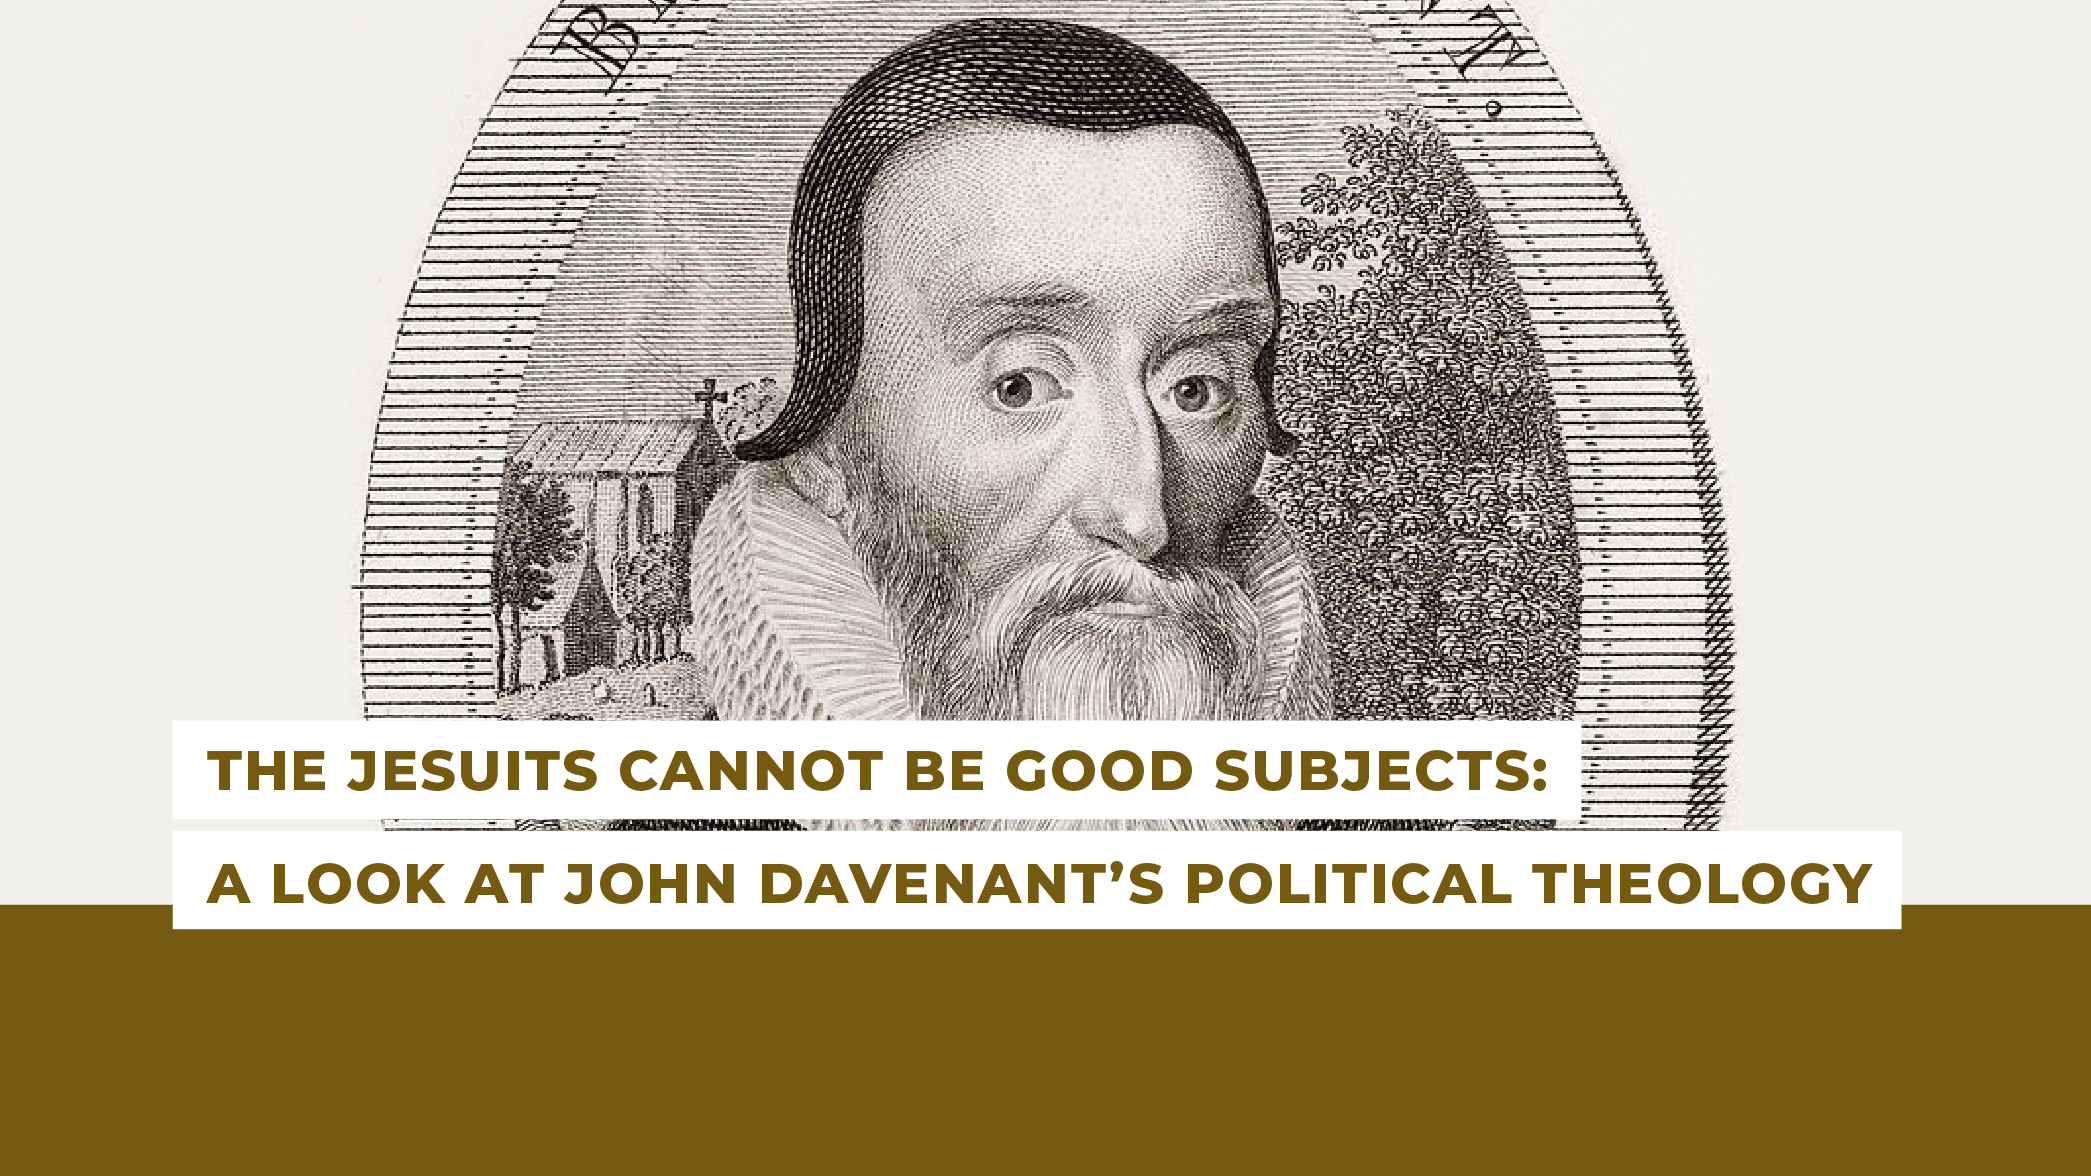 The Jesuits Cannot Be Good Subjects: A Look at John Davenant’s Political Theology